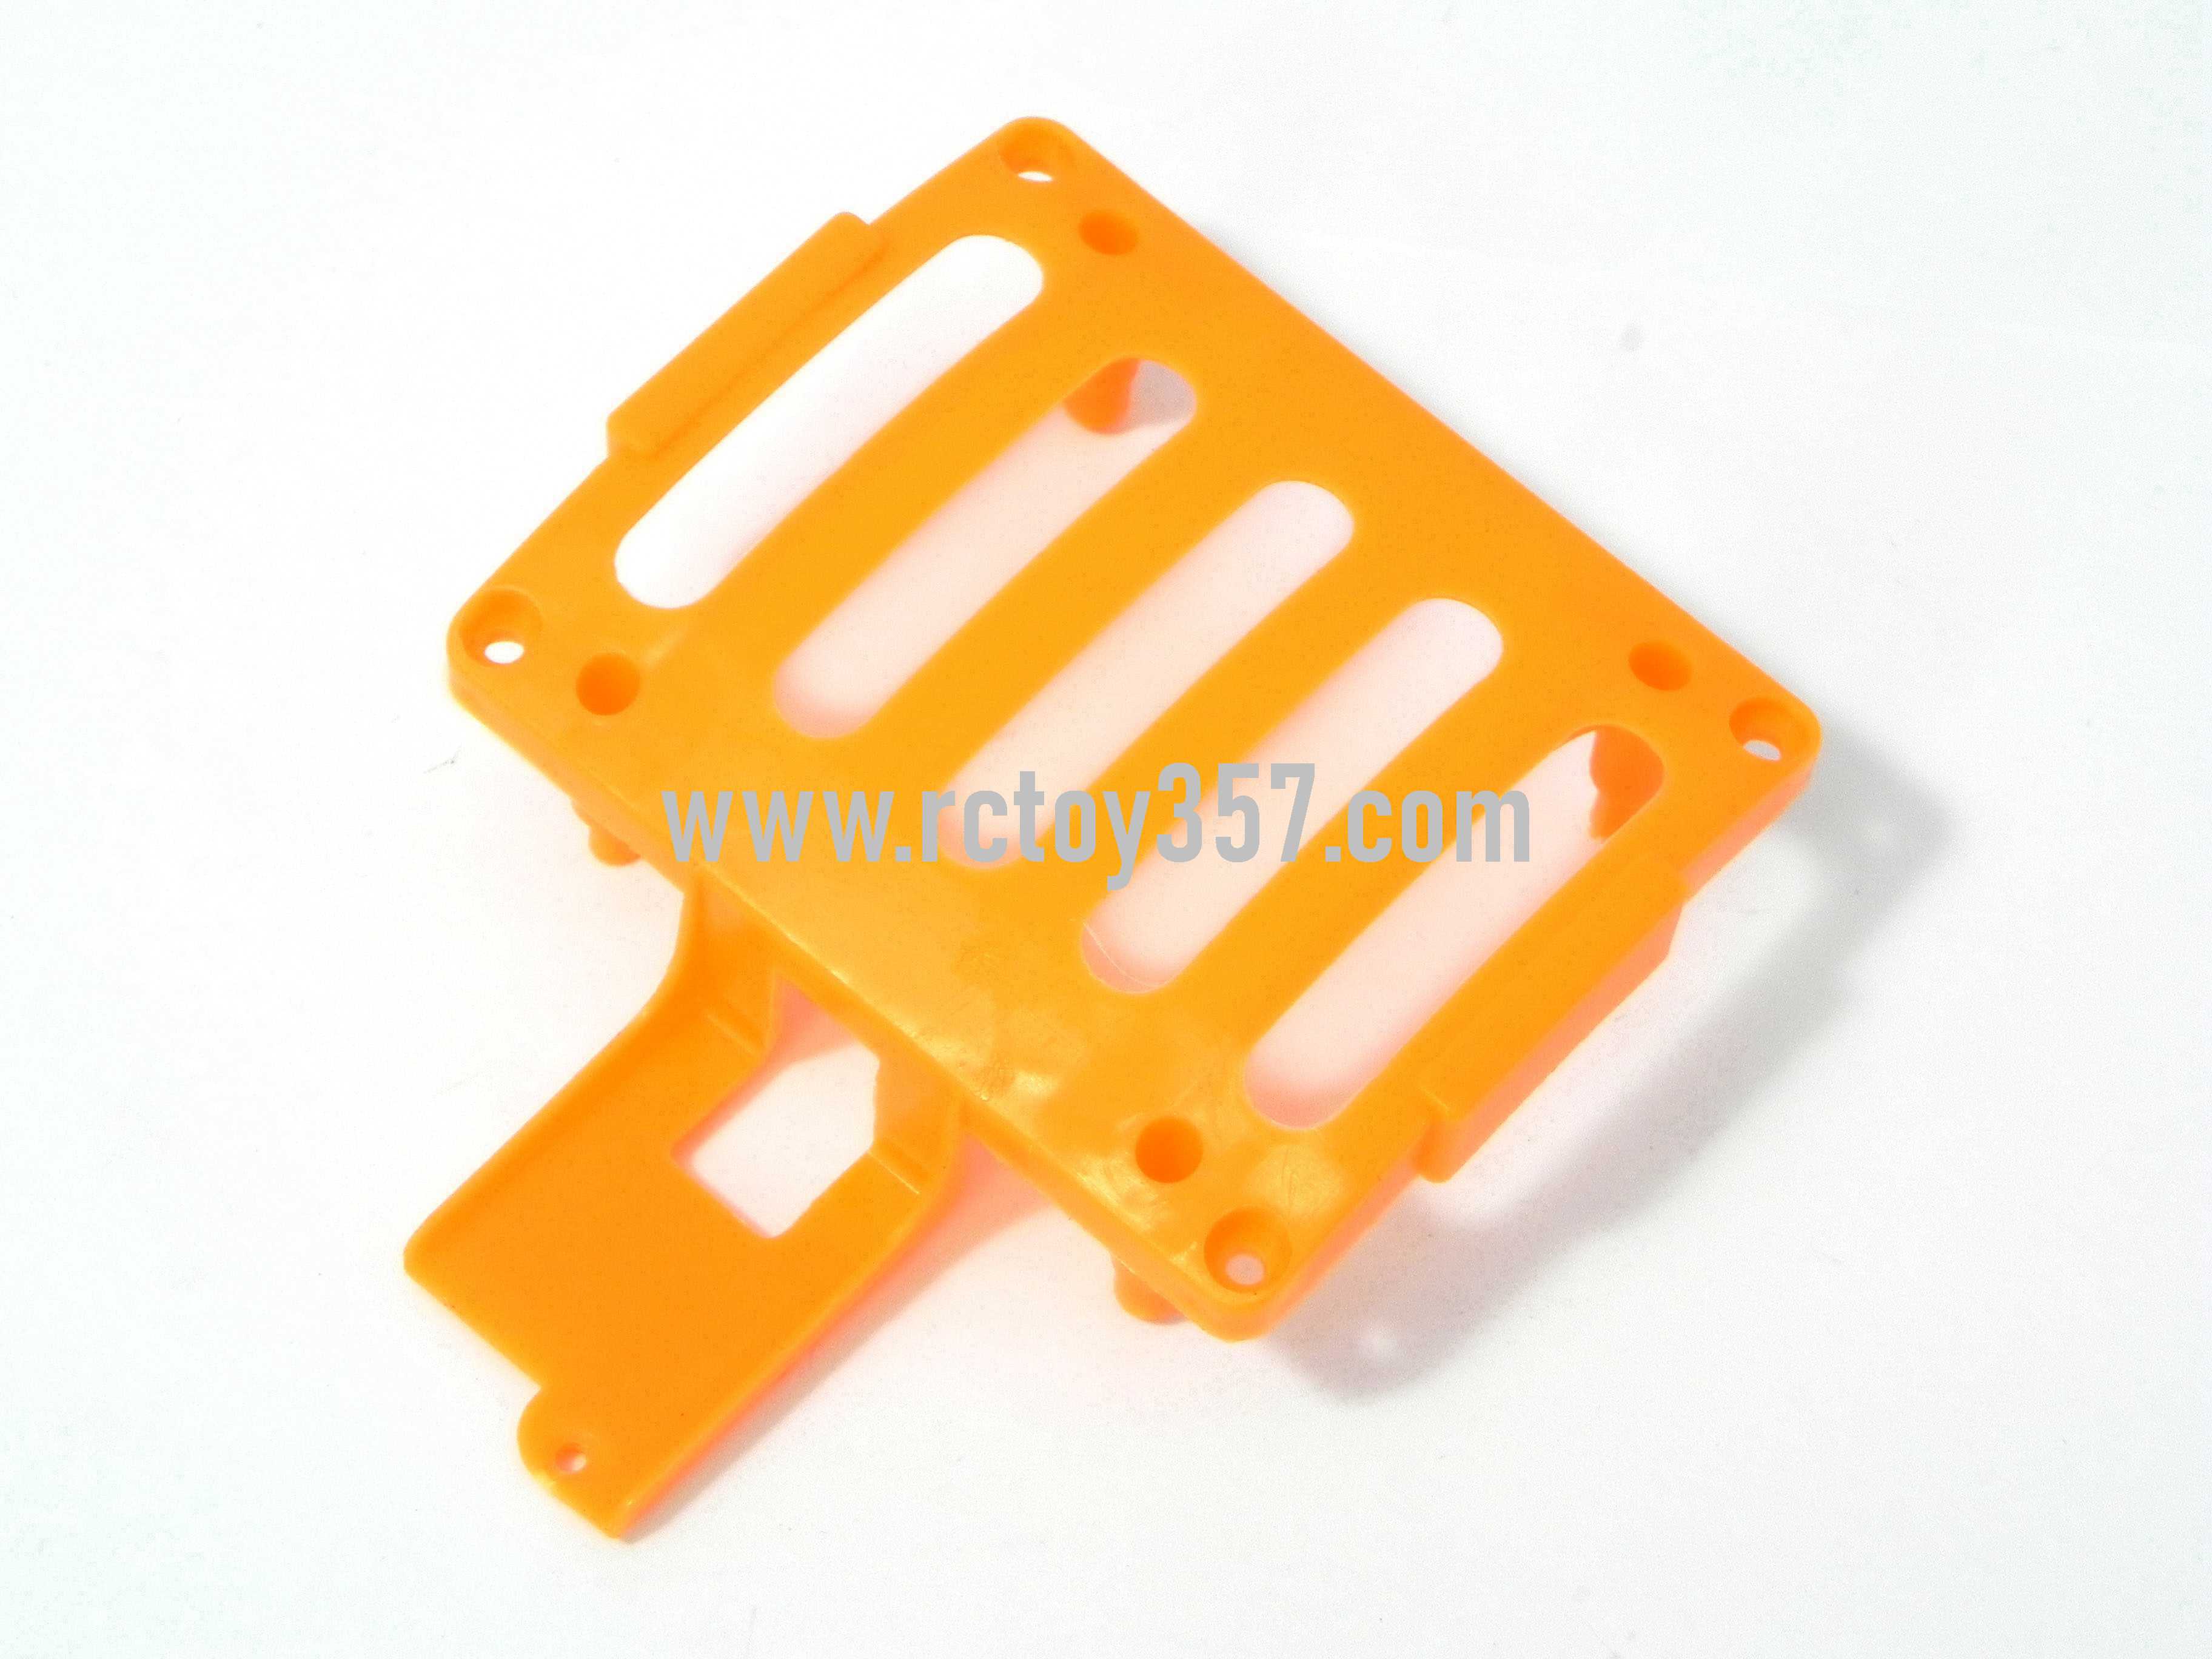 RCToy357.com - SYMA X8W Quadcopter toy Parts Circuit board base(yellow)